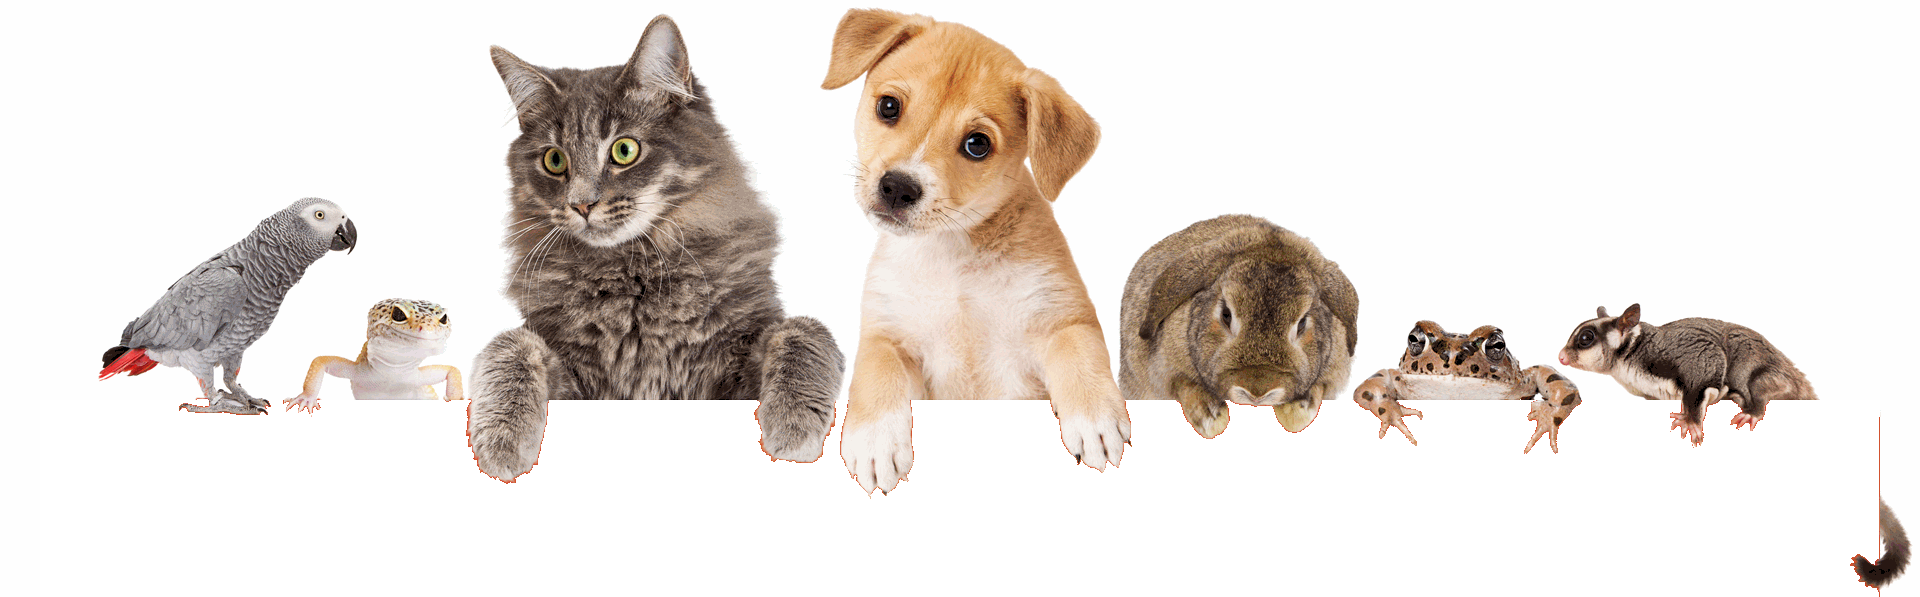 Pets vs pets. Картинка animals Care. Family and Pets. Питомцы семья папугаи. Parental Care of animals.